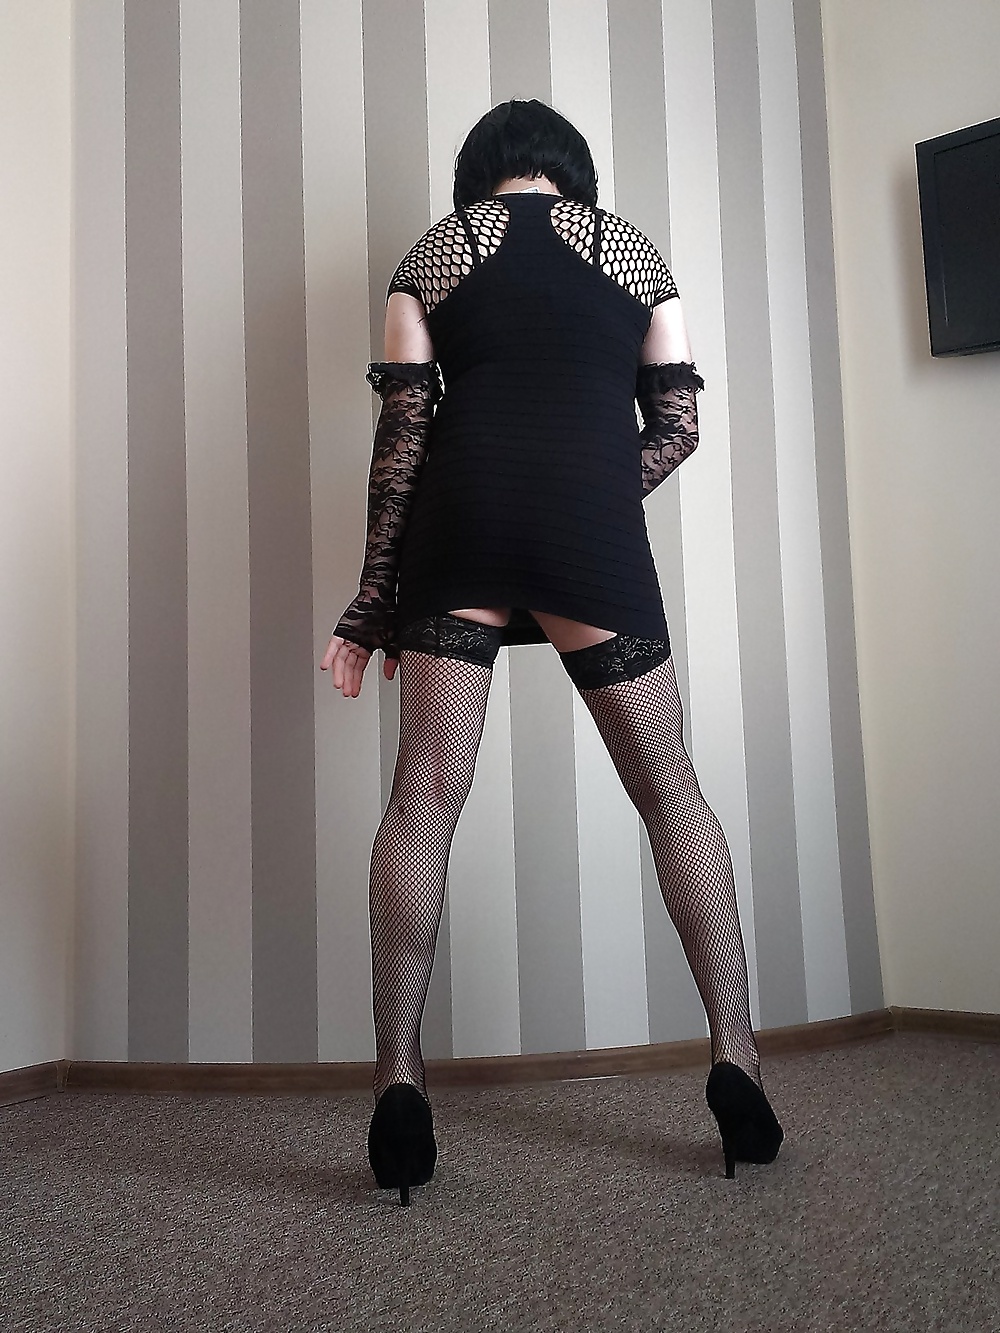 In a hotel room - black minidress, stockings and heels  #28504325